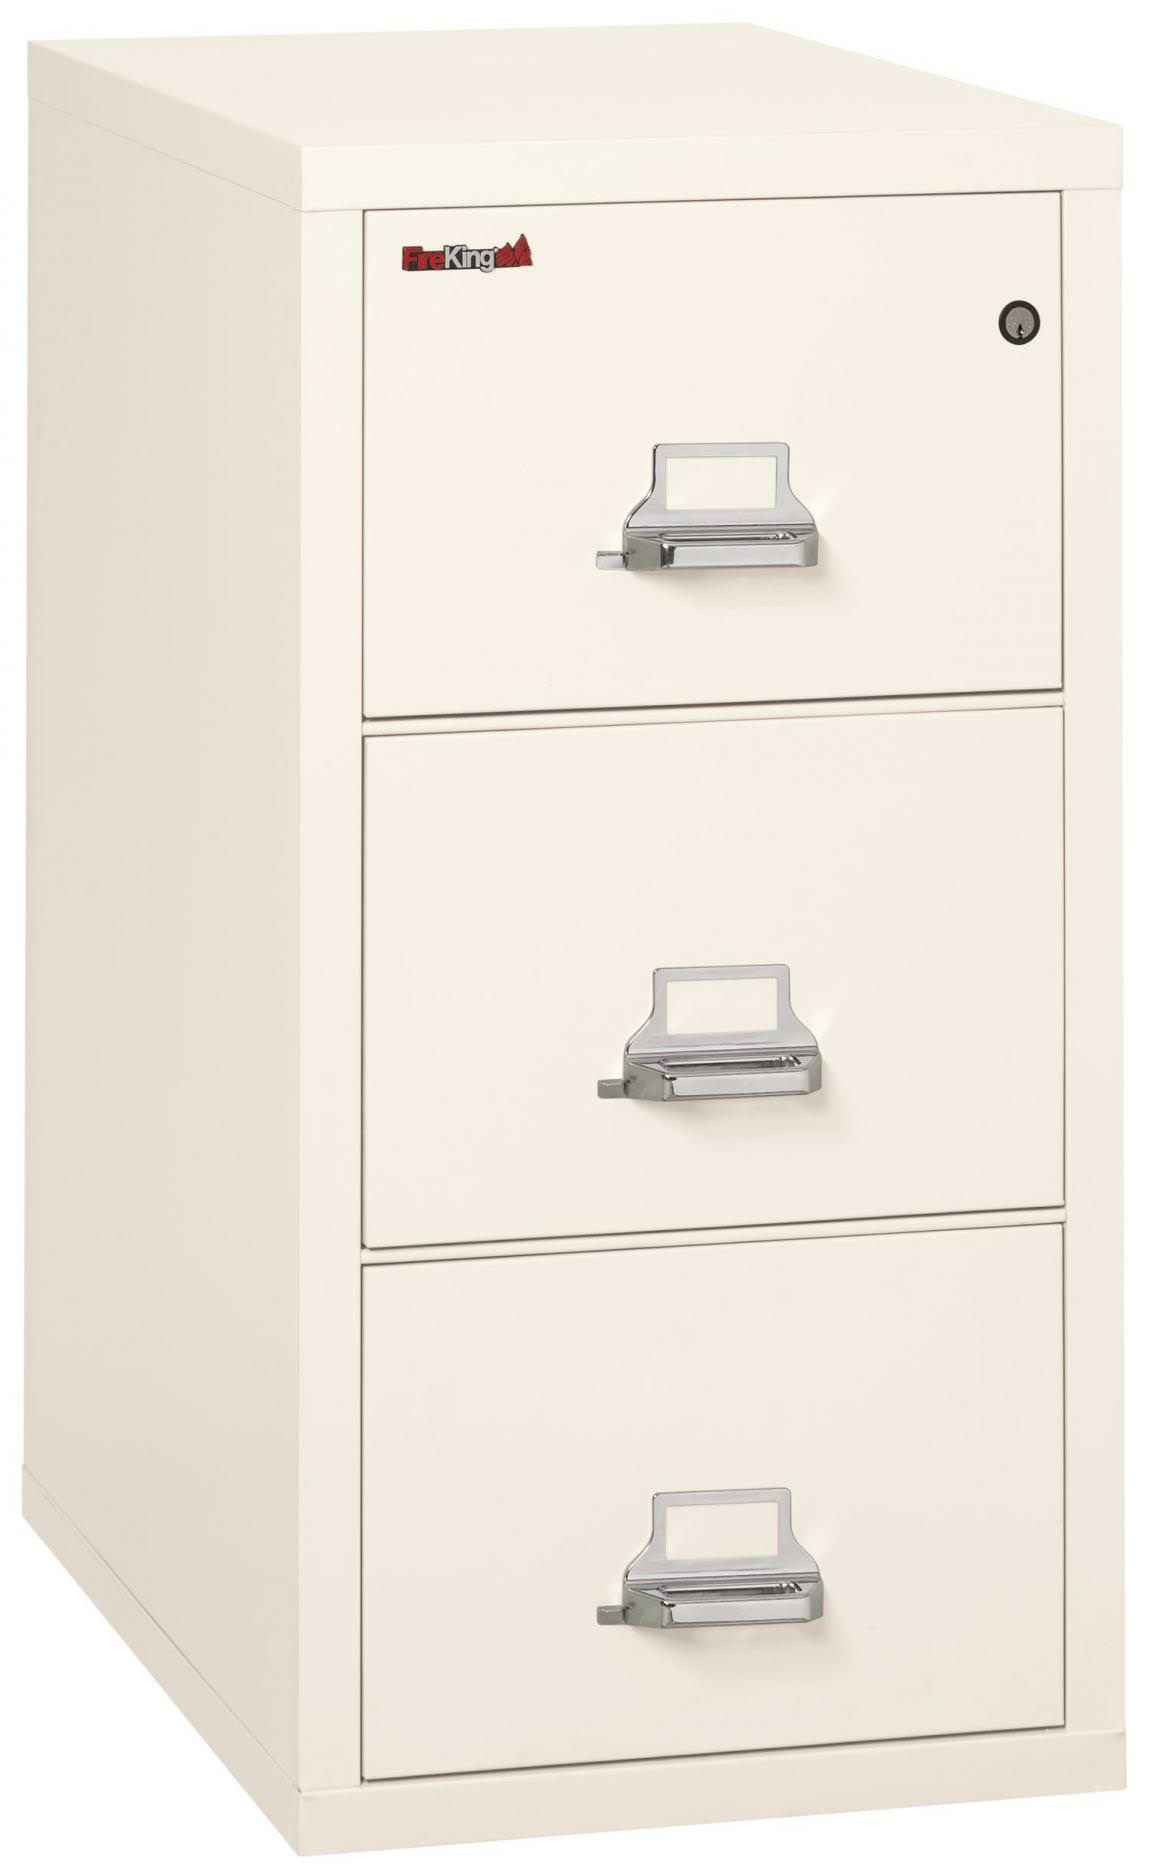 3 Drawer Fireproof File Cabinet - Legal Size